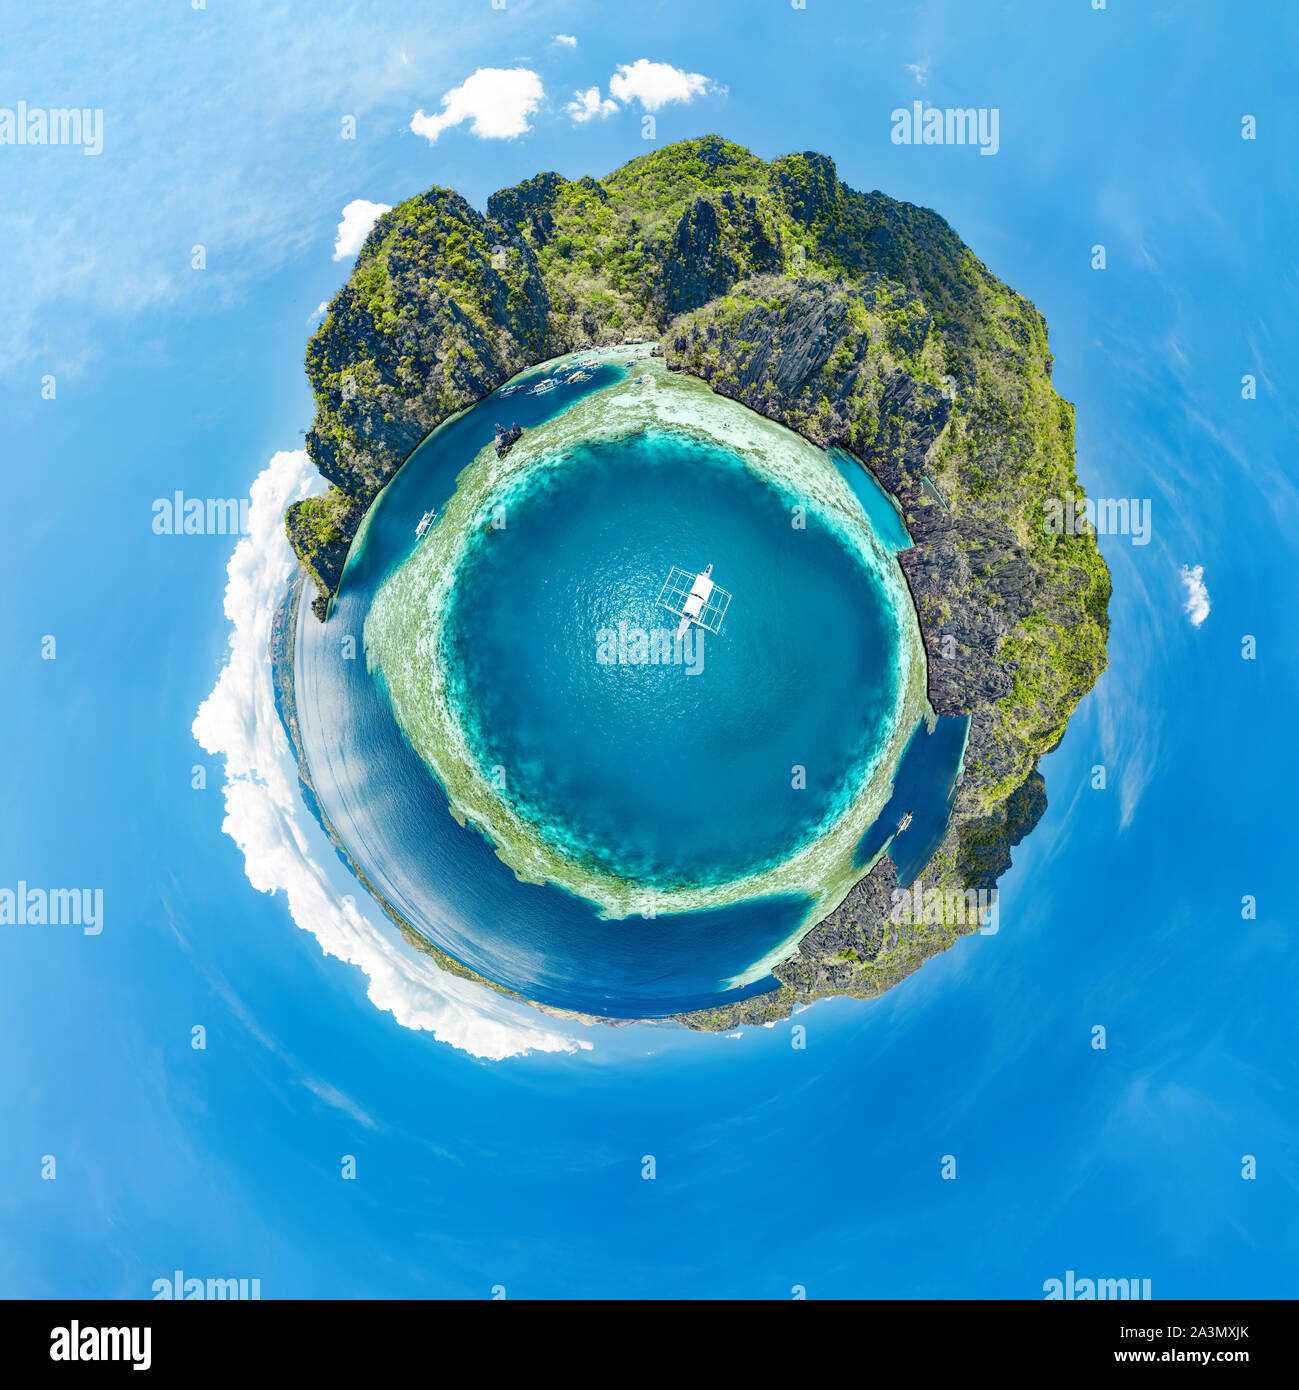 Little planet view of Coron island in Philippines Stock Photo